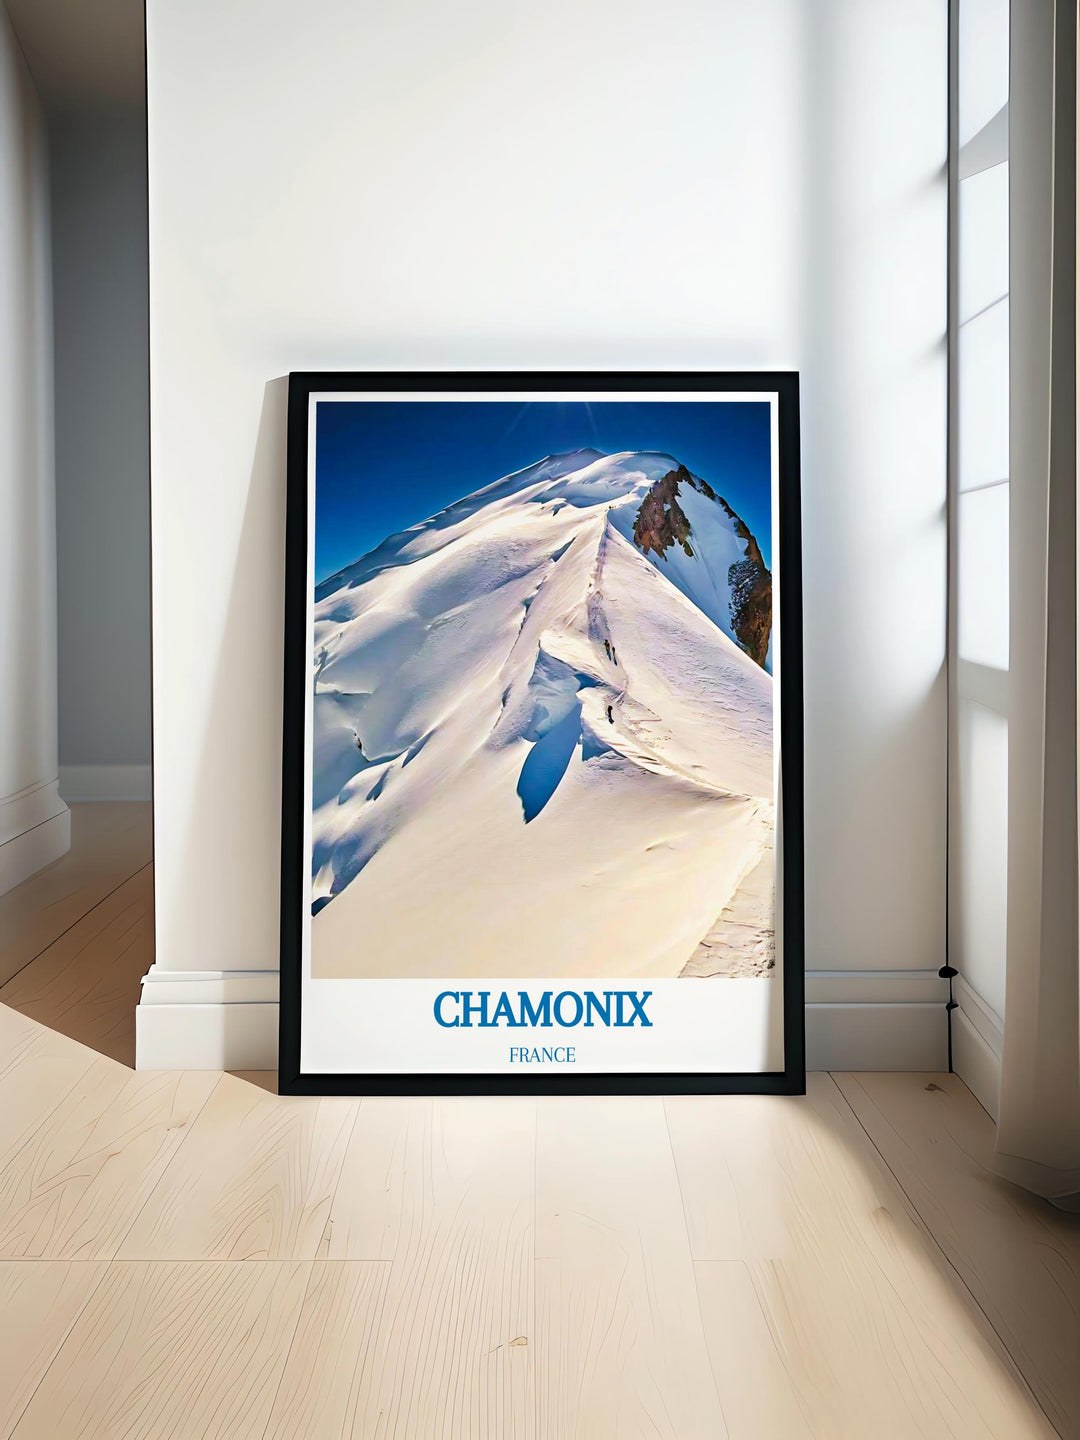  Majestic sunrise over Mont Blanc, showcasing its towering peak and glowing snowcaps in a breathtaking Chamonix framed printv